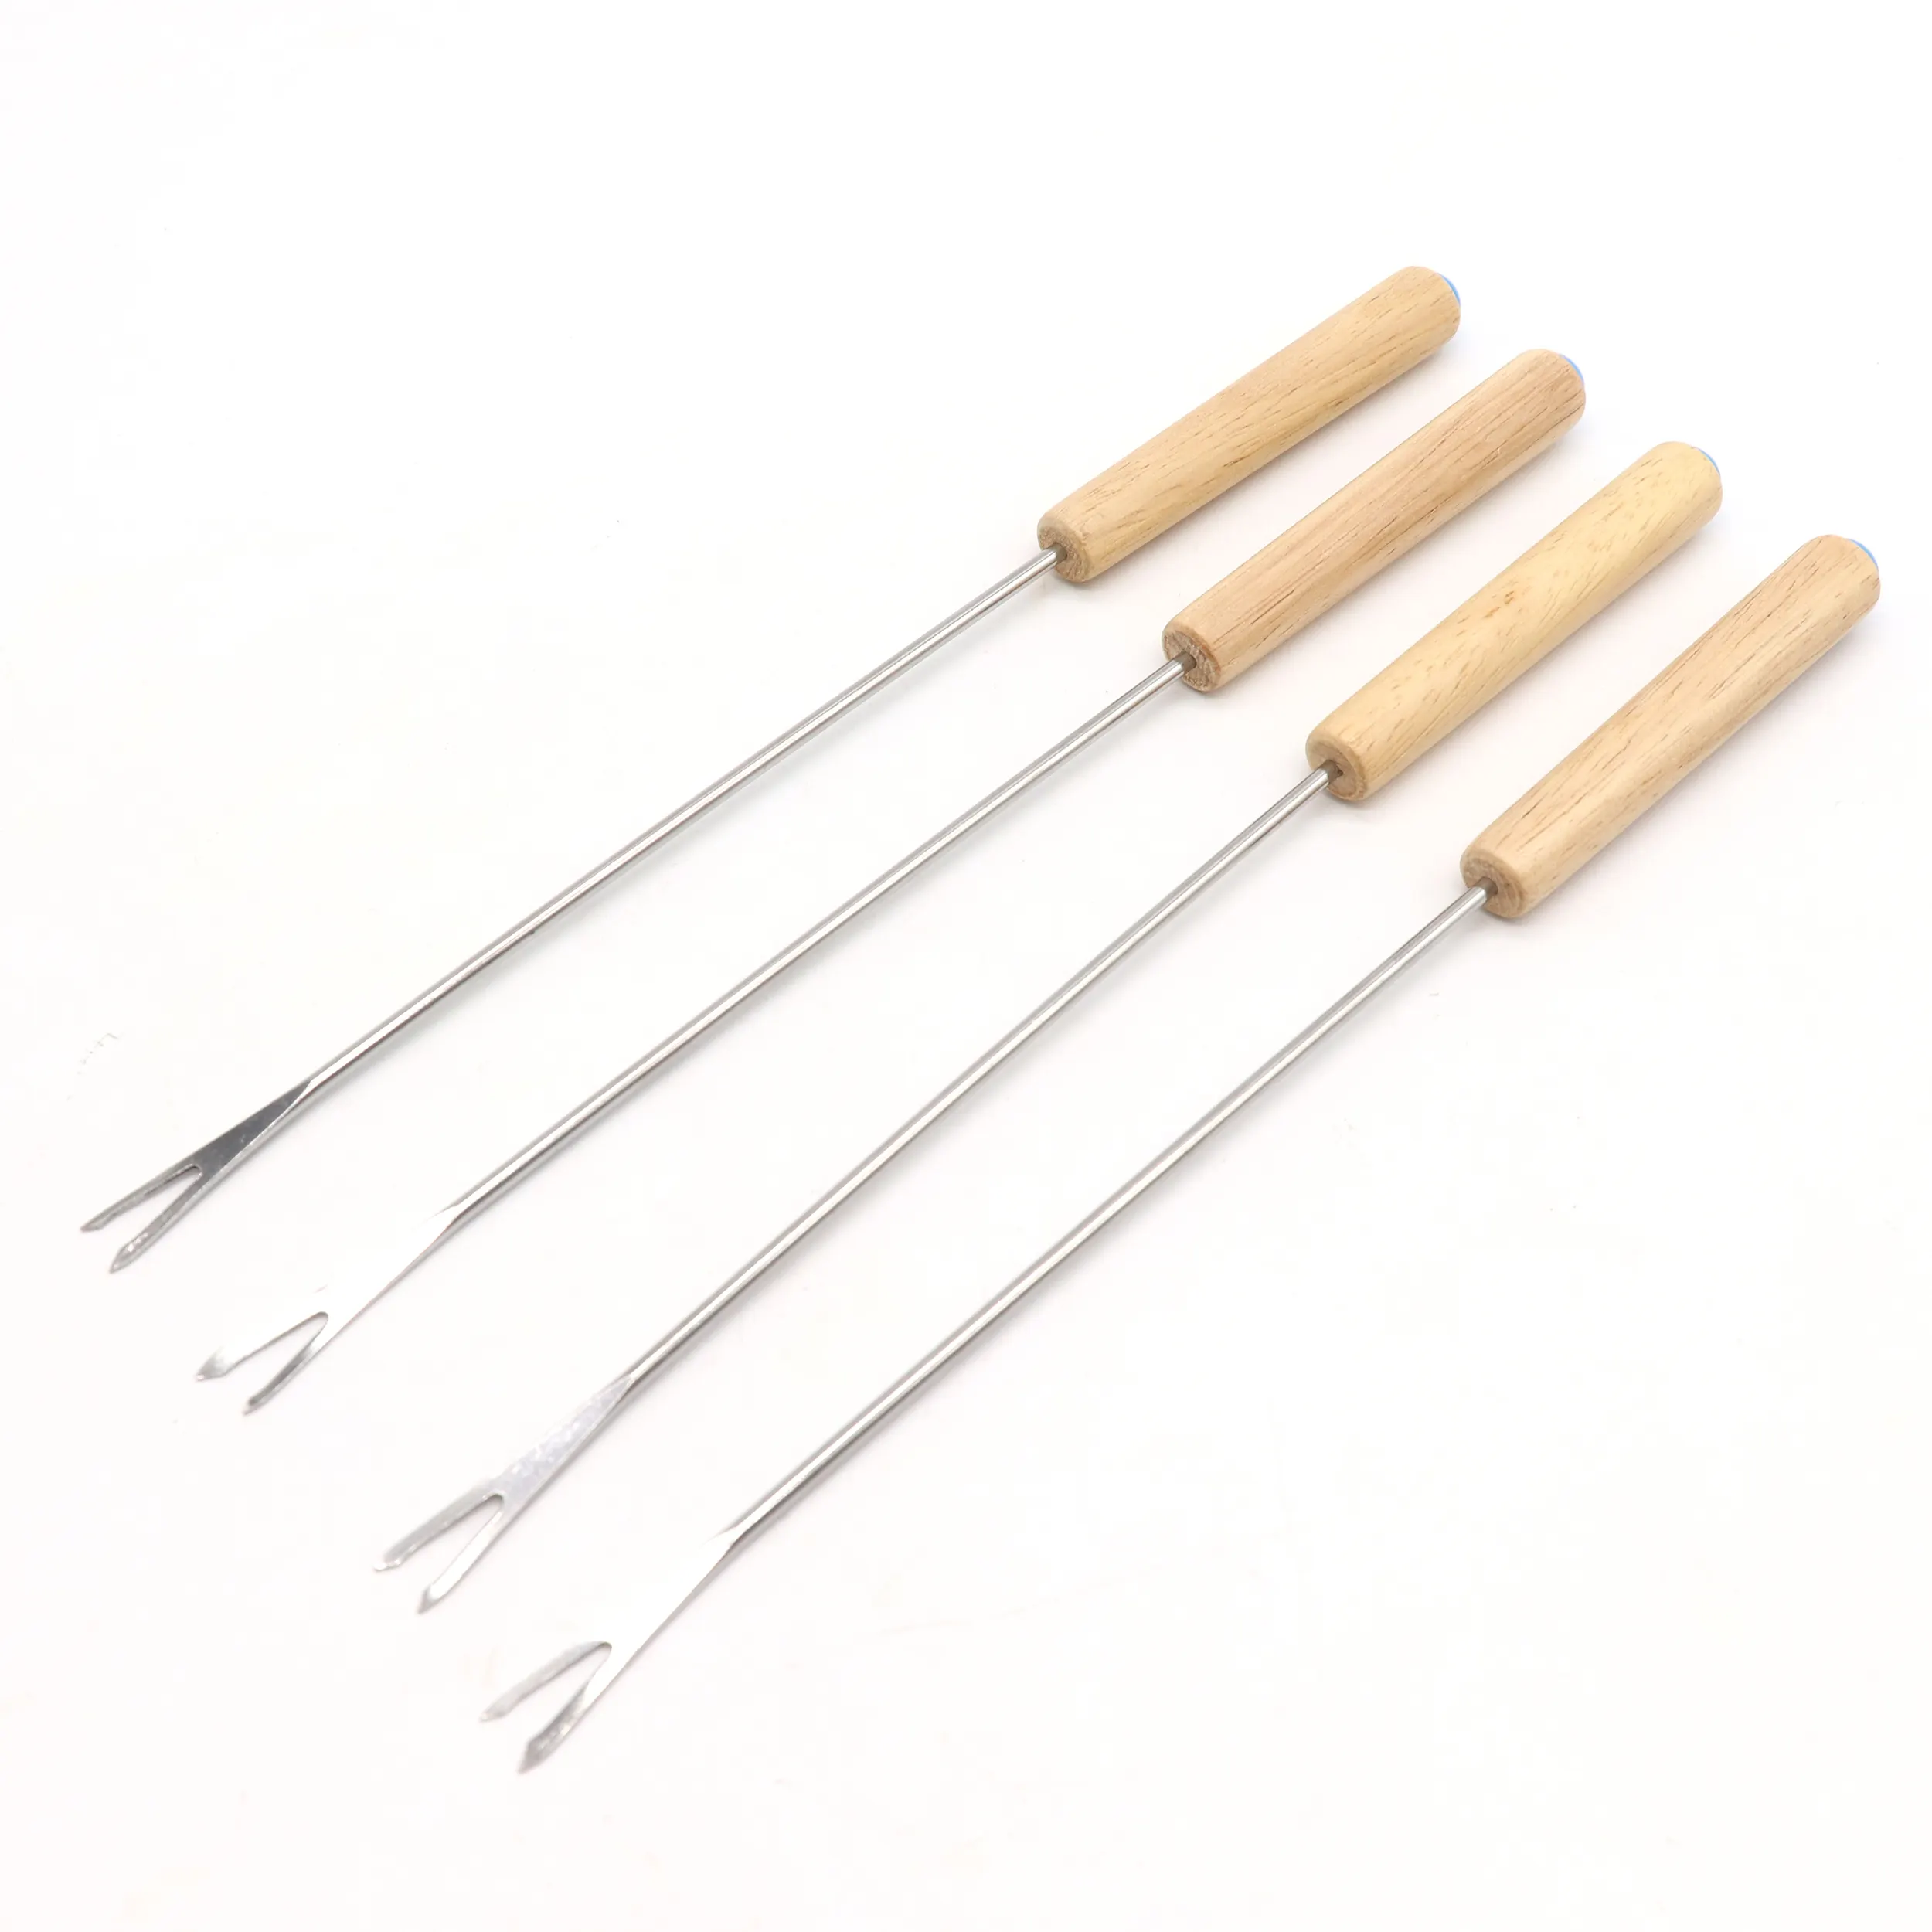 Roasting Sticks with Wooden Handle Extendable Forks Telescoping Smores Skewers for Campfire Firepit and Sausage BBQ